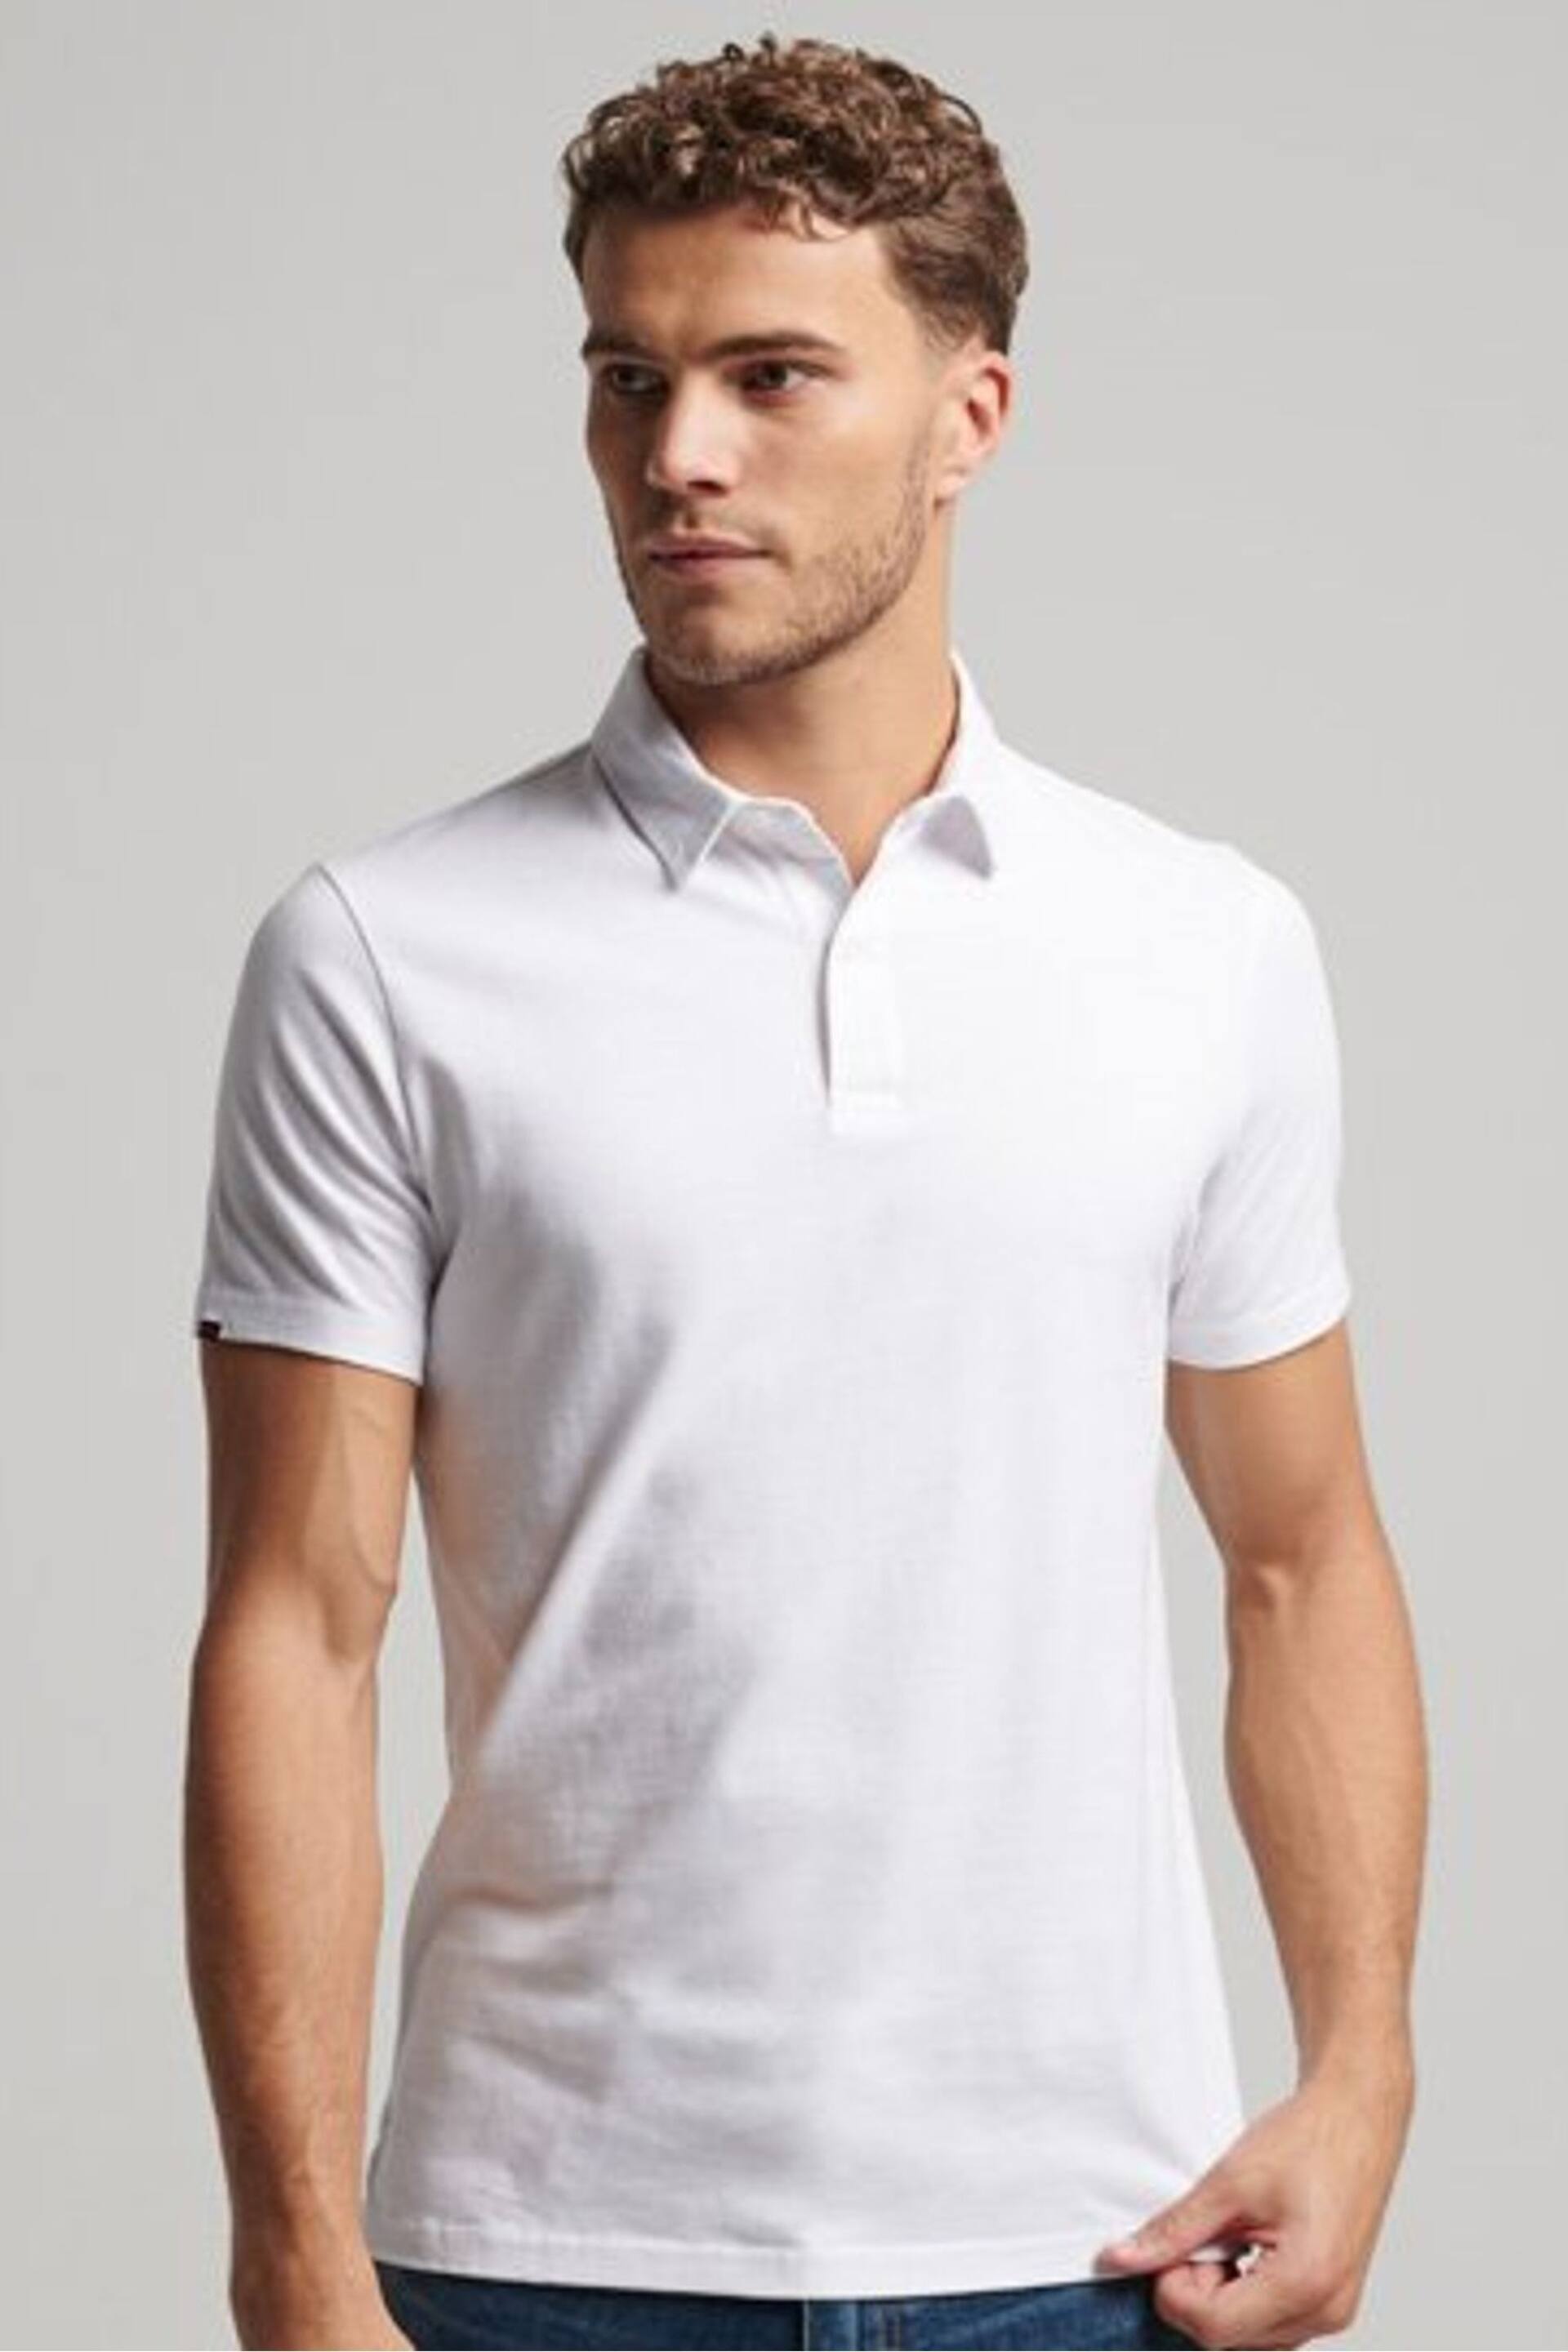 Superdry White Jersey Polo Shirt - Image 3 of 4